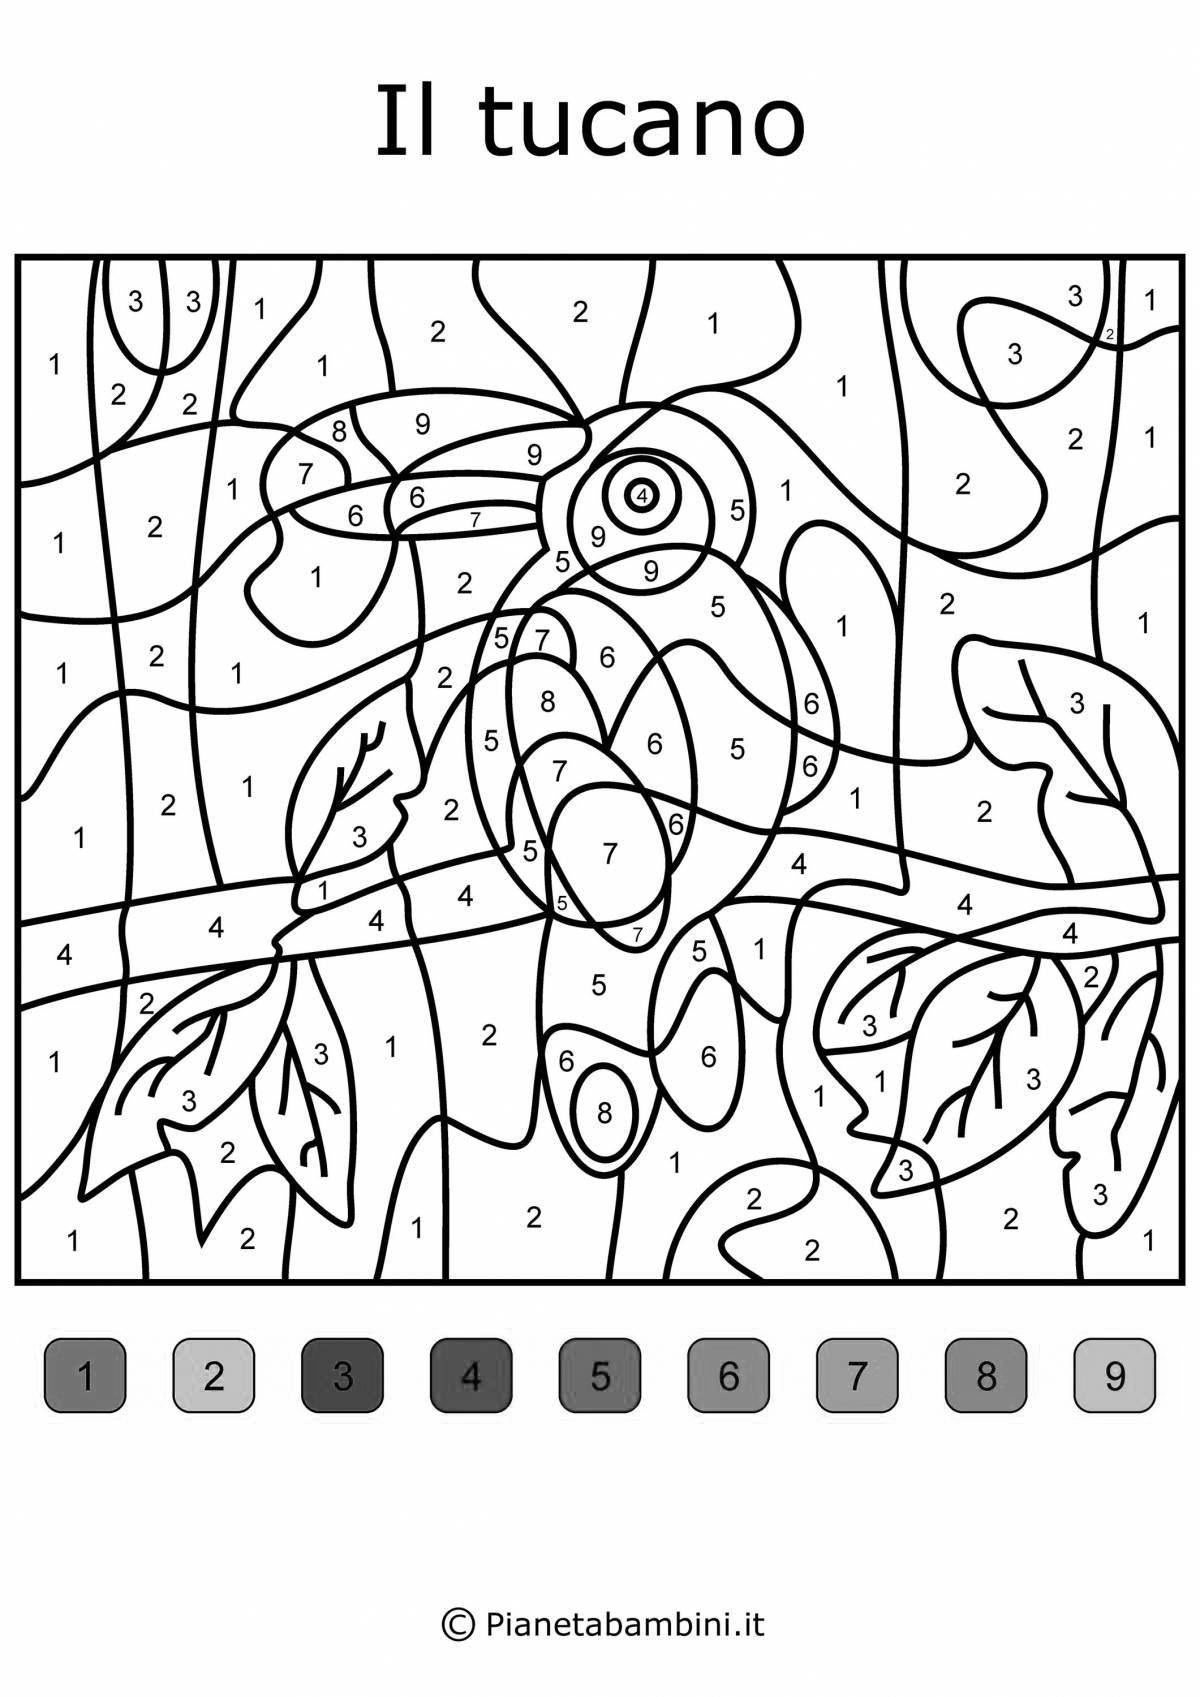 Amazing chameleon coloring page